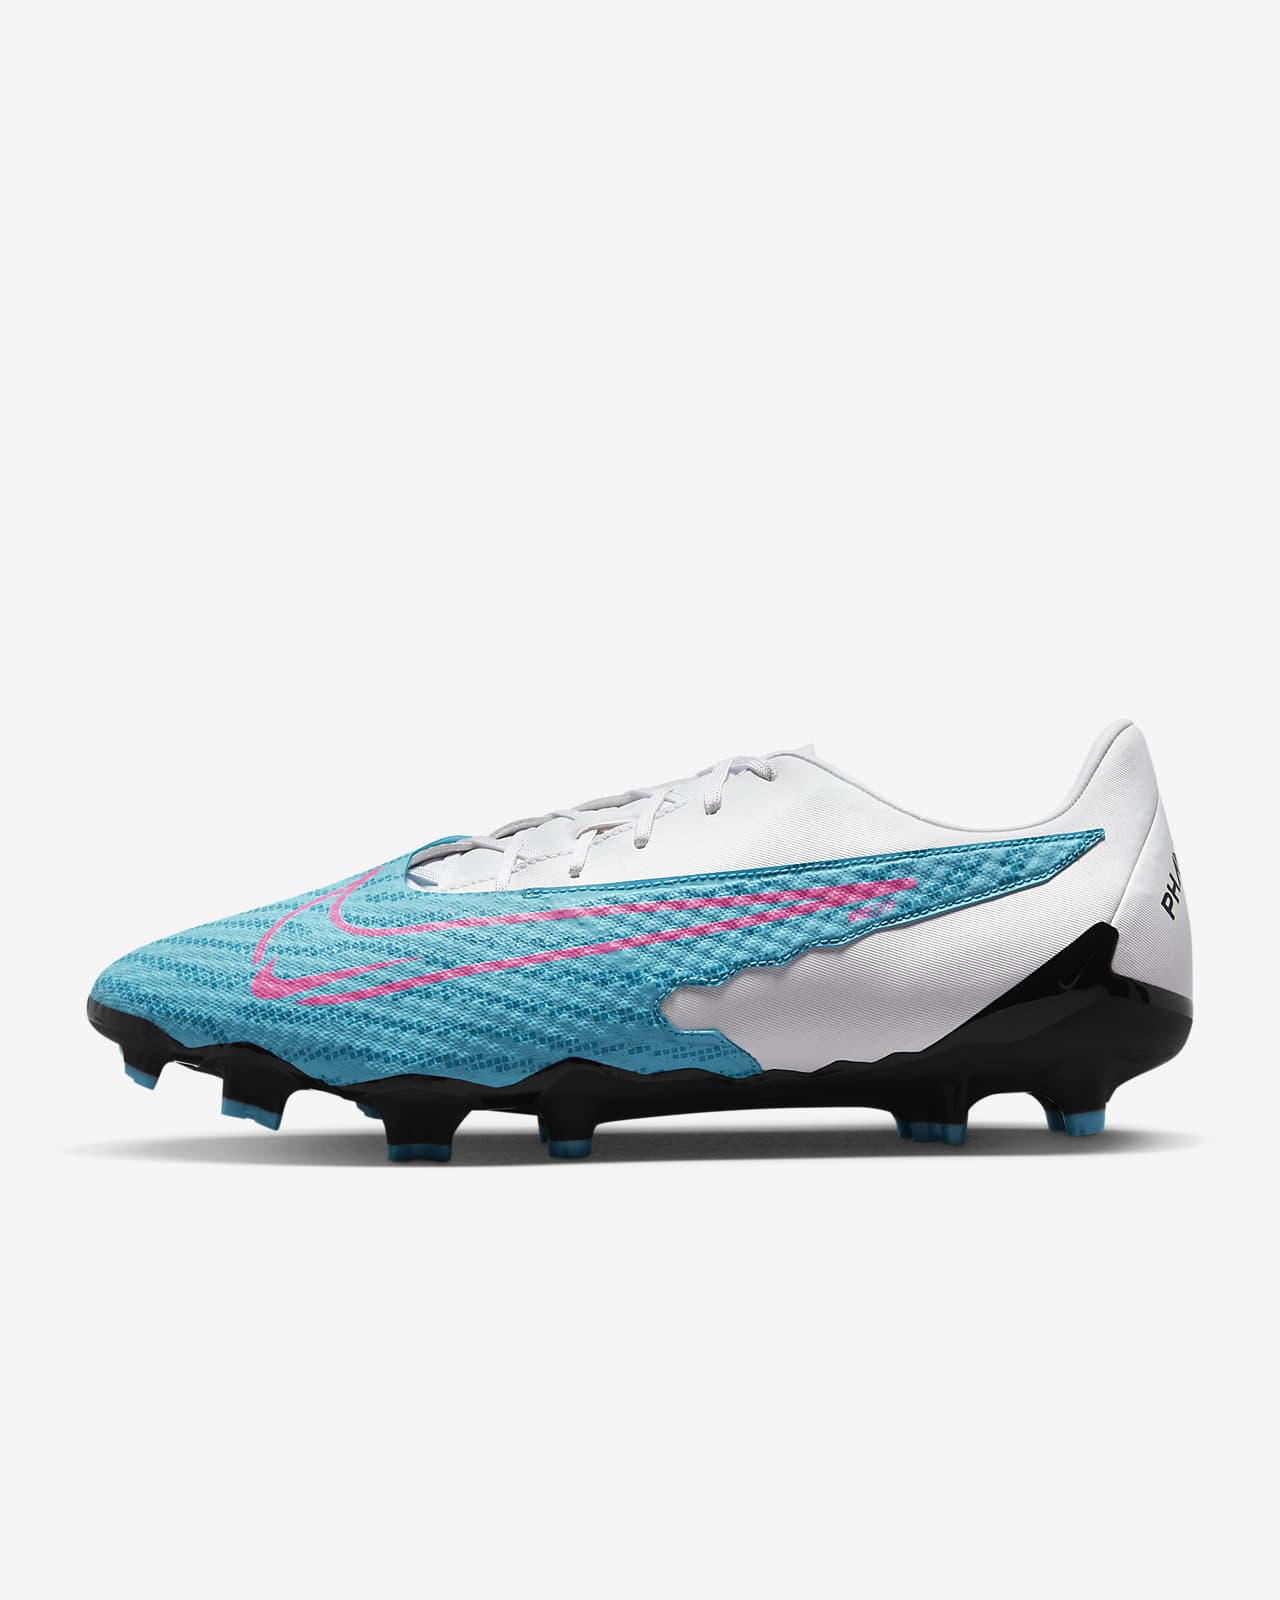 nike pink rugby boots